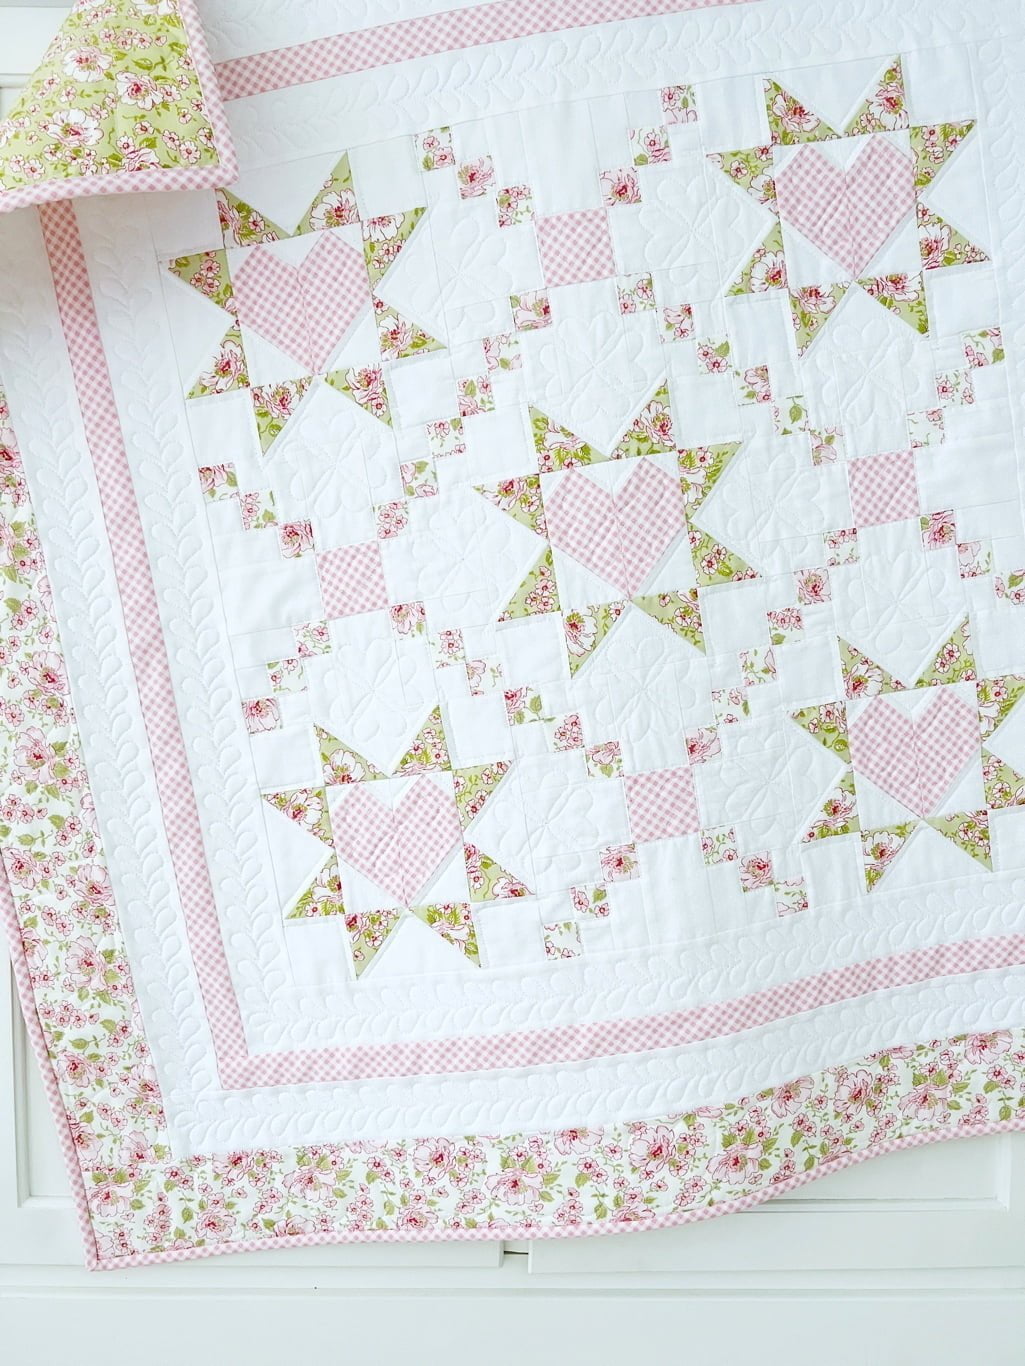 Loving Wishes Quilt Pattern pic 10